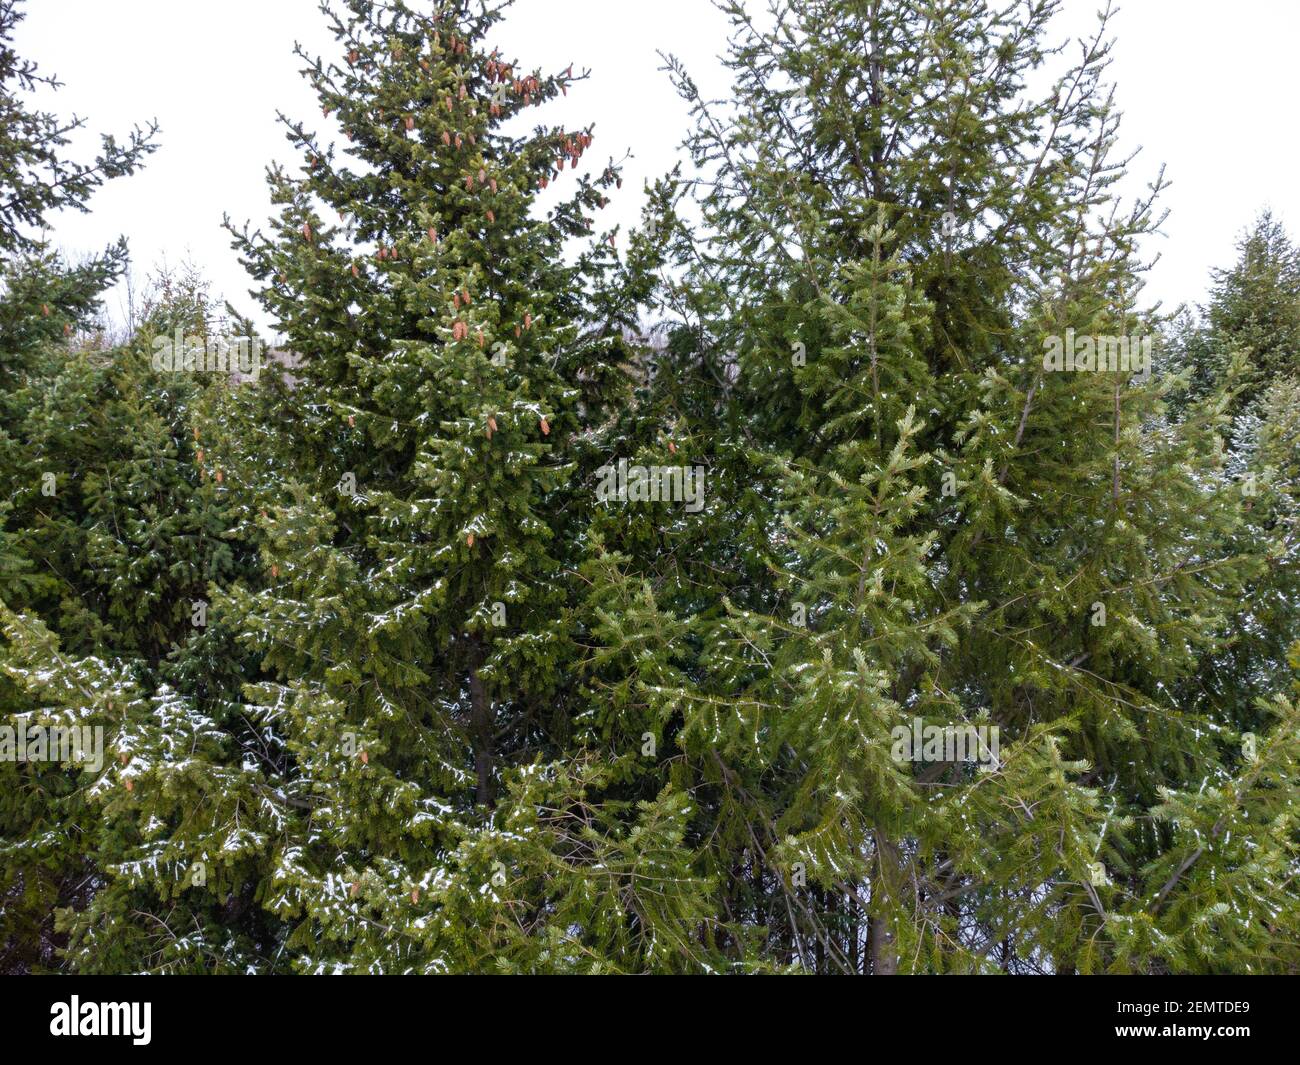 Branches of evergreen tree in forest · Free Stock Photo